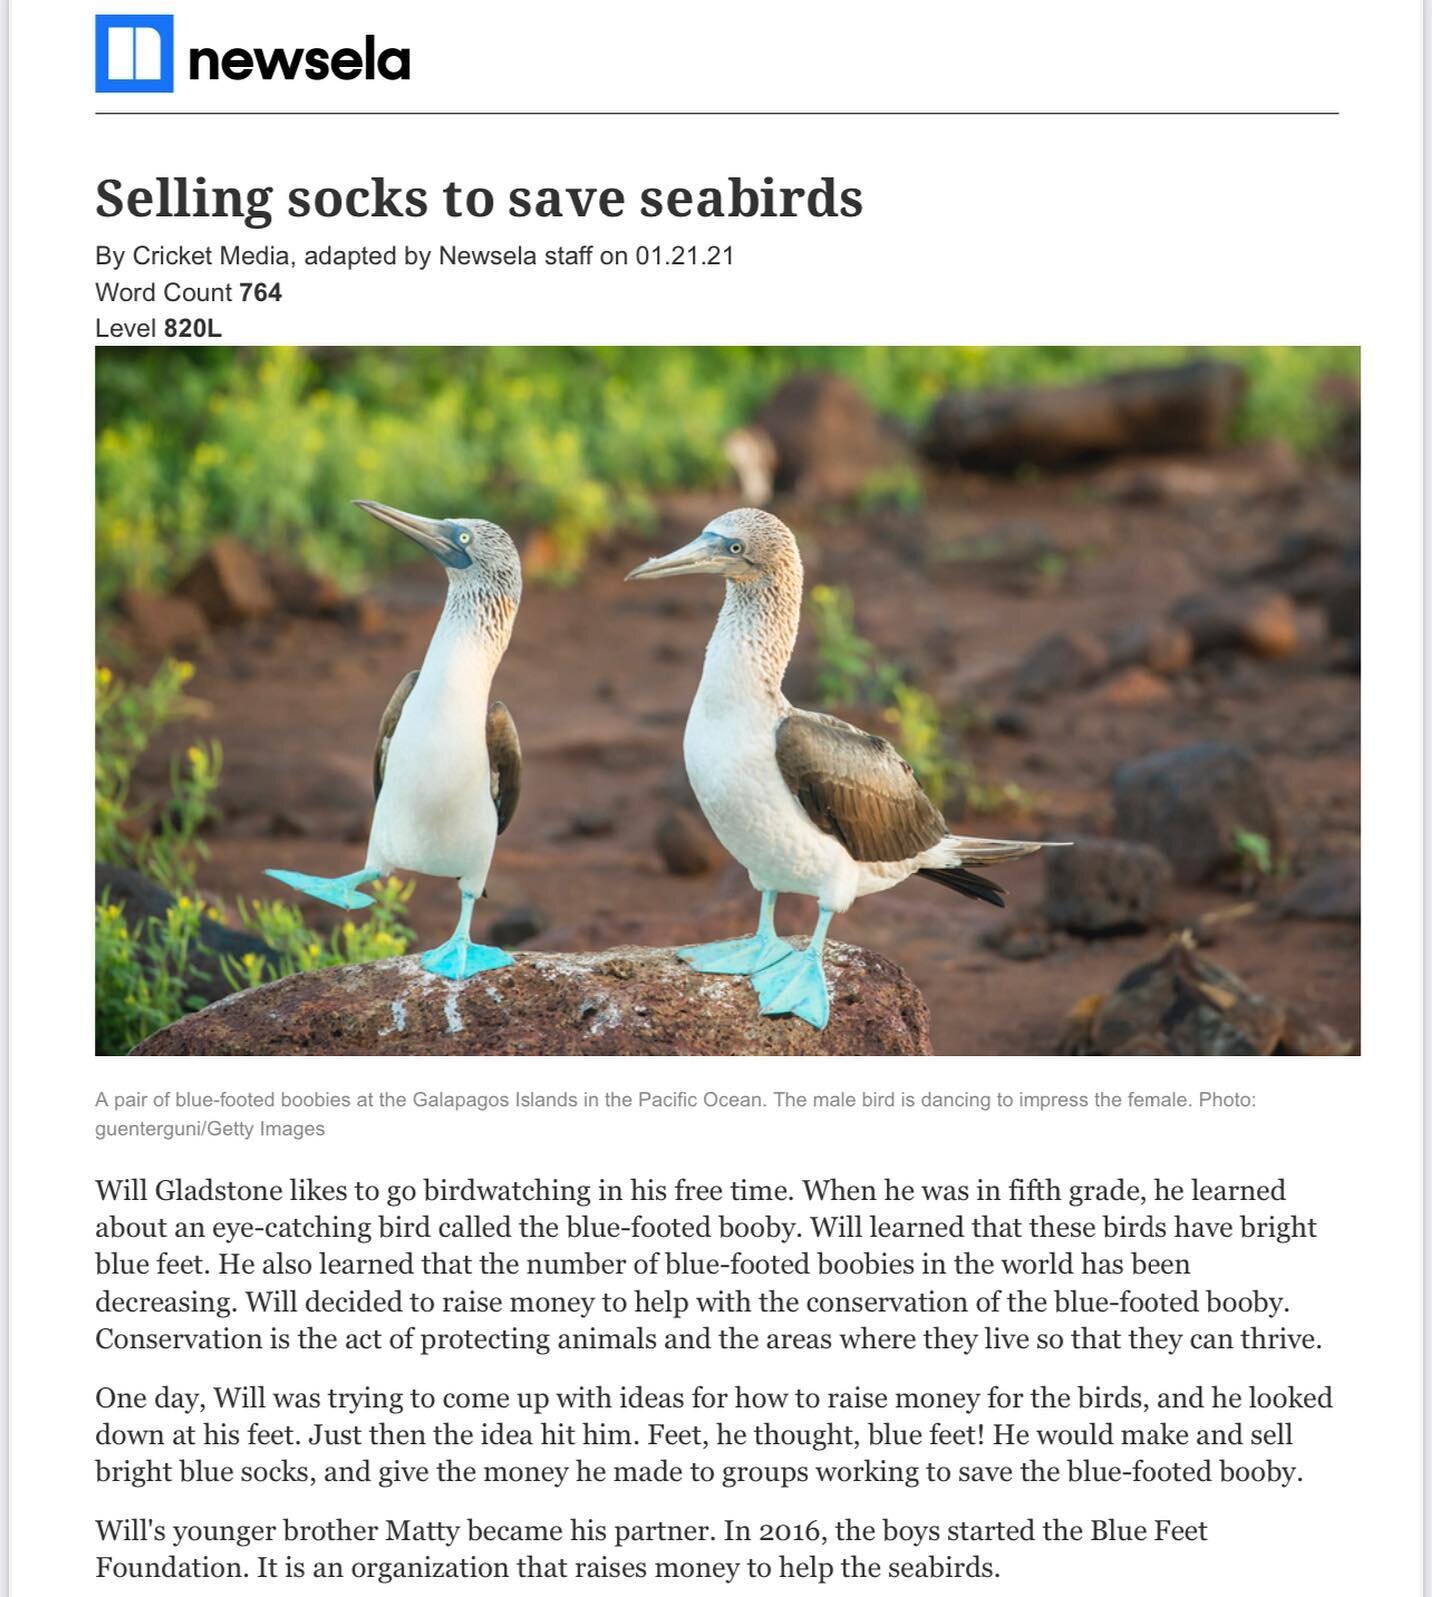 Thanks @newsela for making an article about us. We read your articles in our school! 

#conservation #bluefootedbooby #newsela #cricketmedia #homework #quiz #kidscanchangetheworld